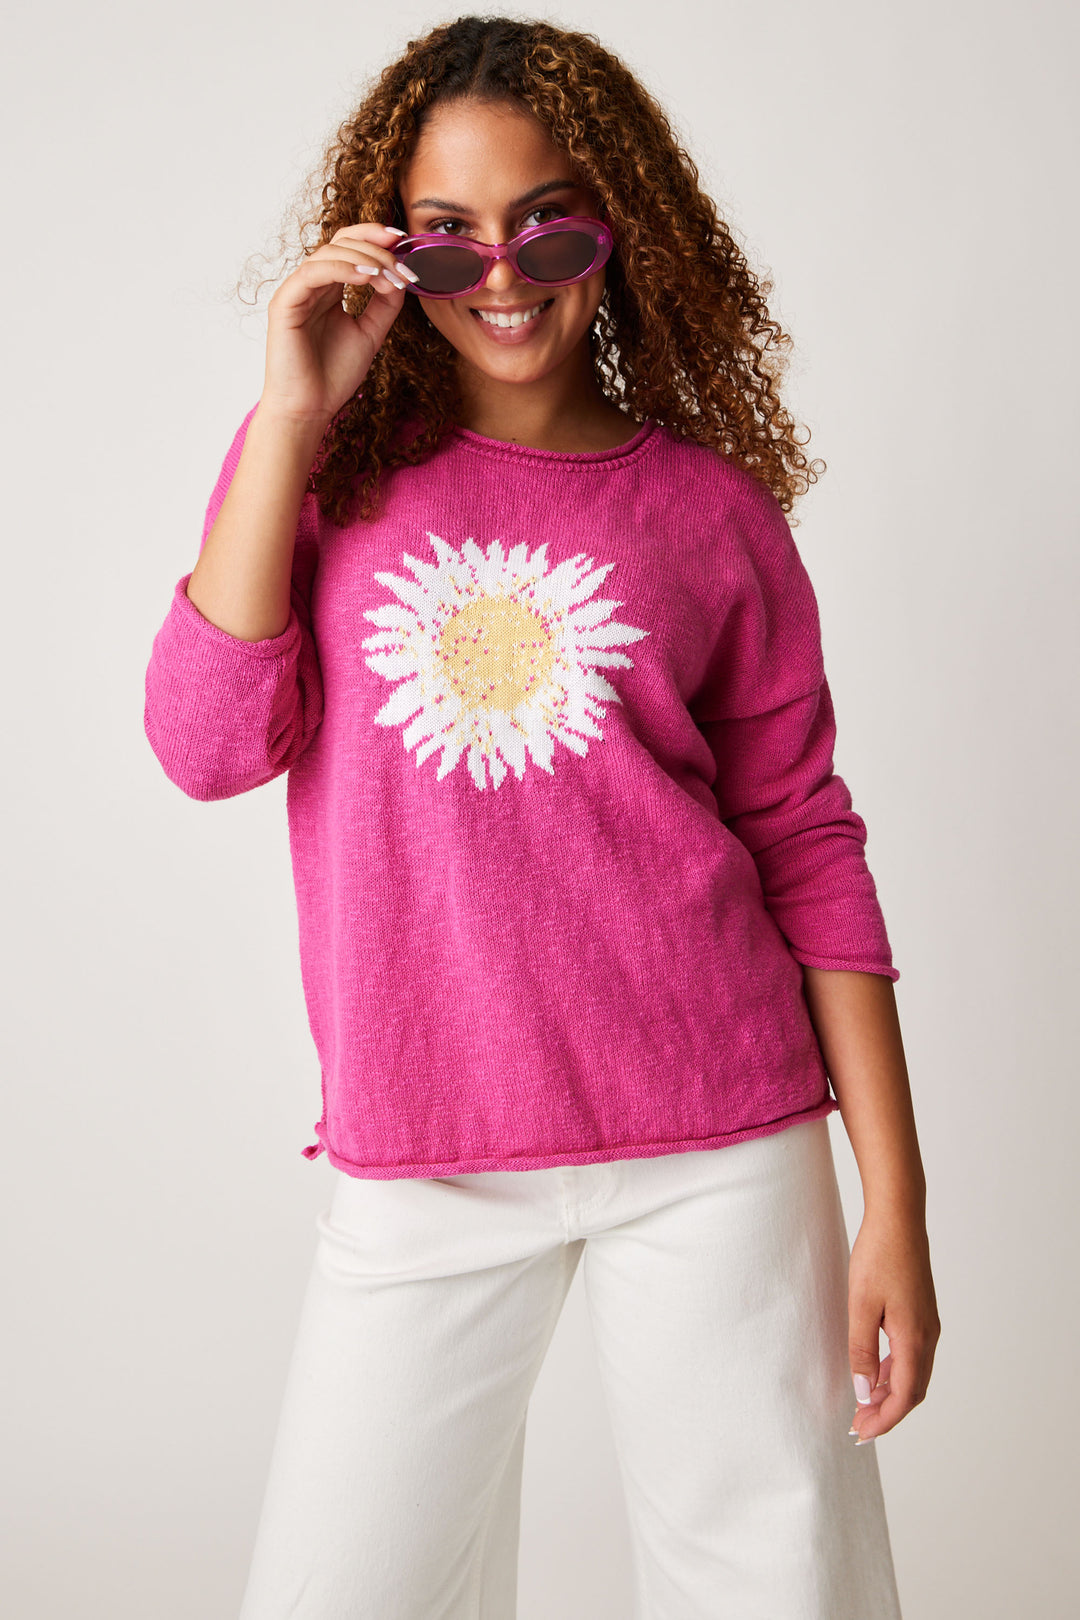 So standout with a rolled hem, 3/4 length rolled sleeves with a slight boat neckline with a cheerful flower embroidered into the sweater.  